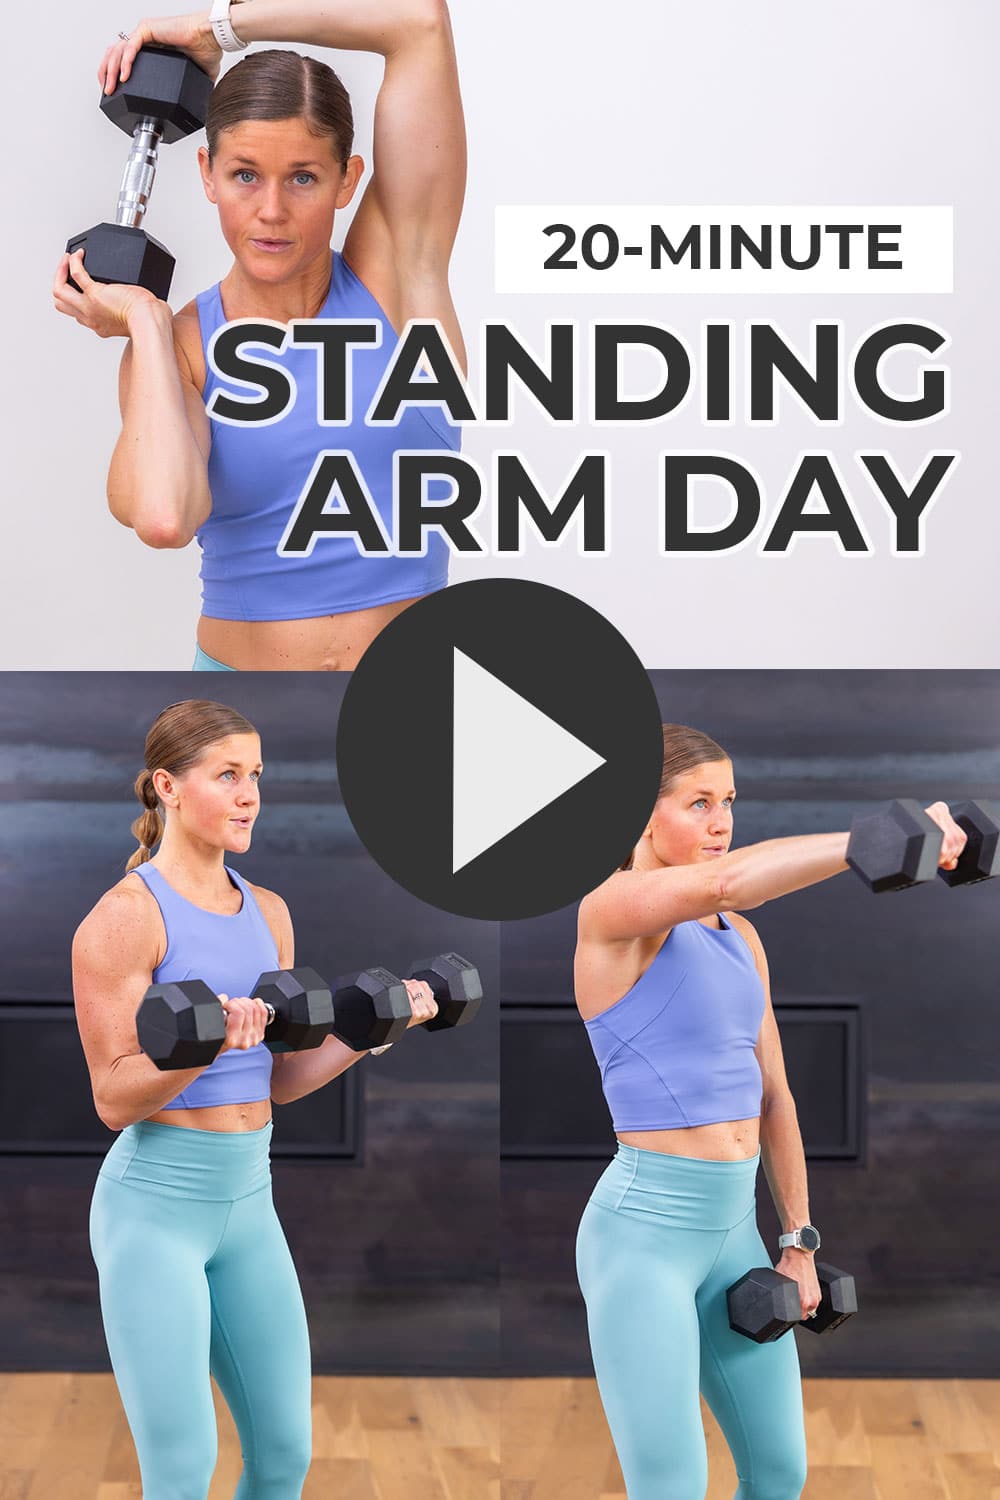 20-Min Upper Body Dumbbell Workout (Video) | Nourish Move Love